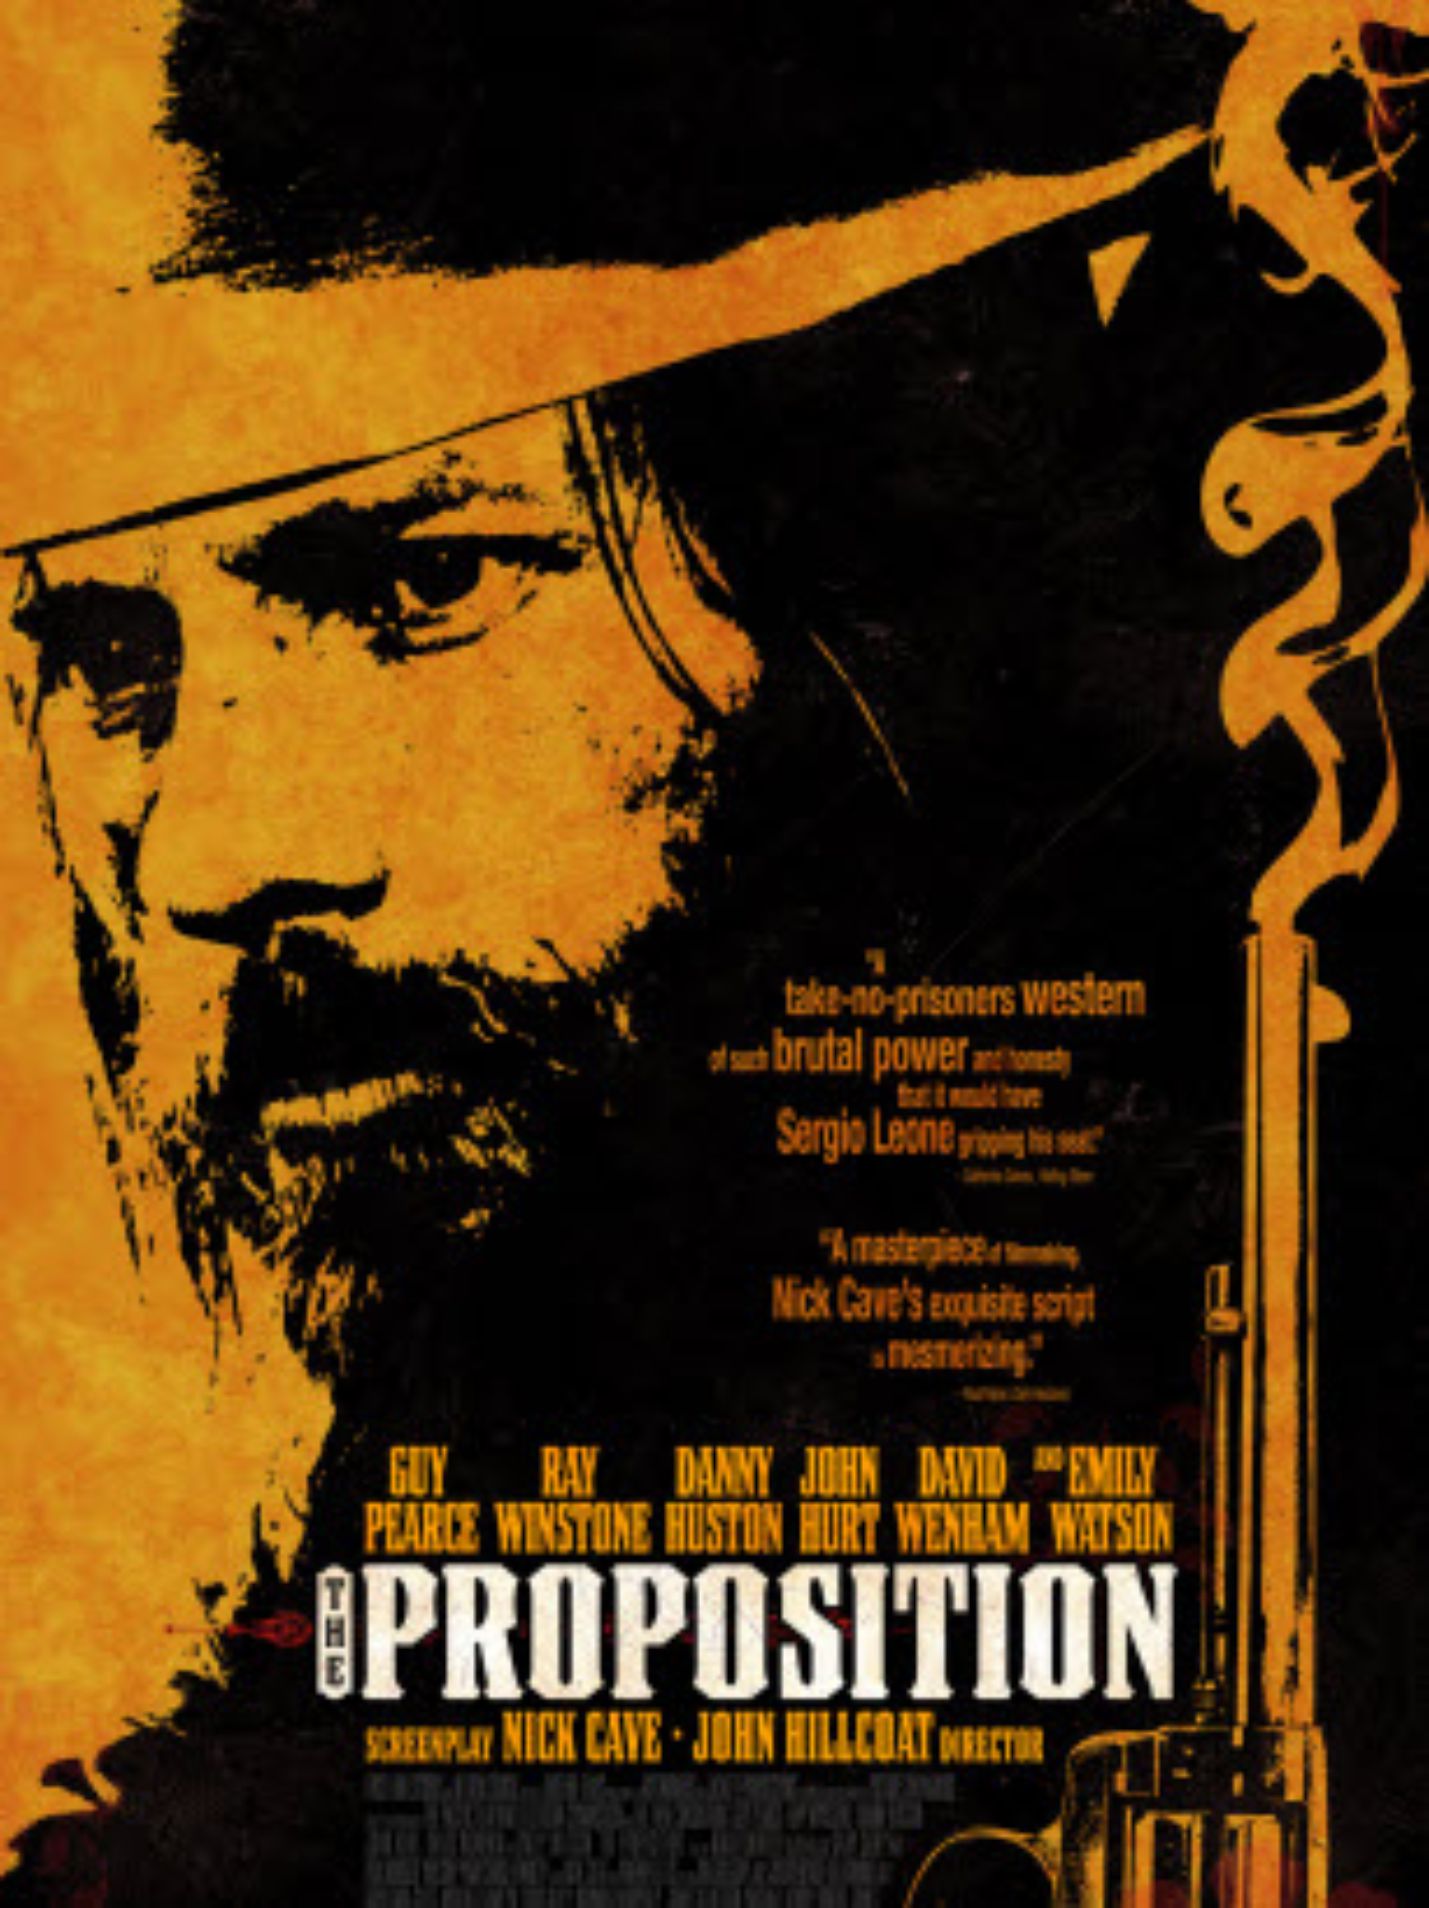 Guy Pearce - The Proposition